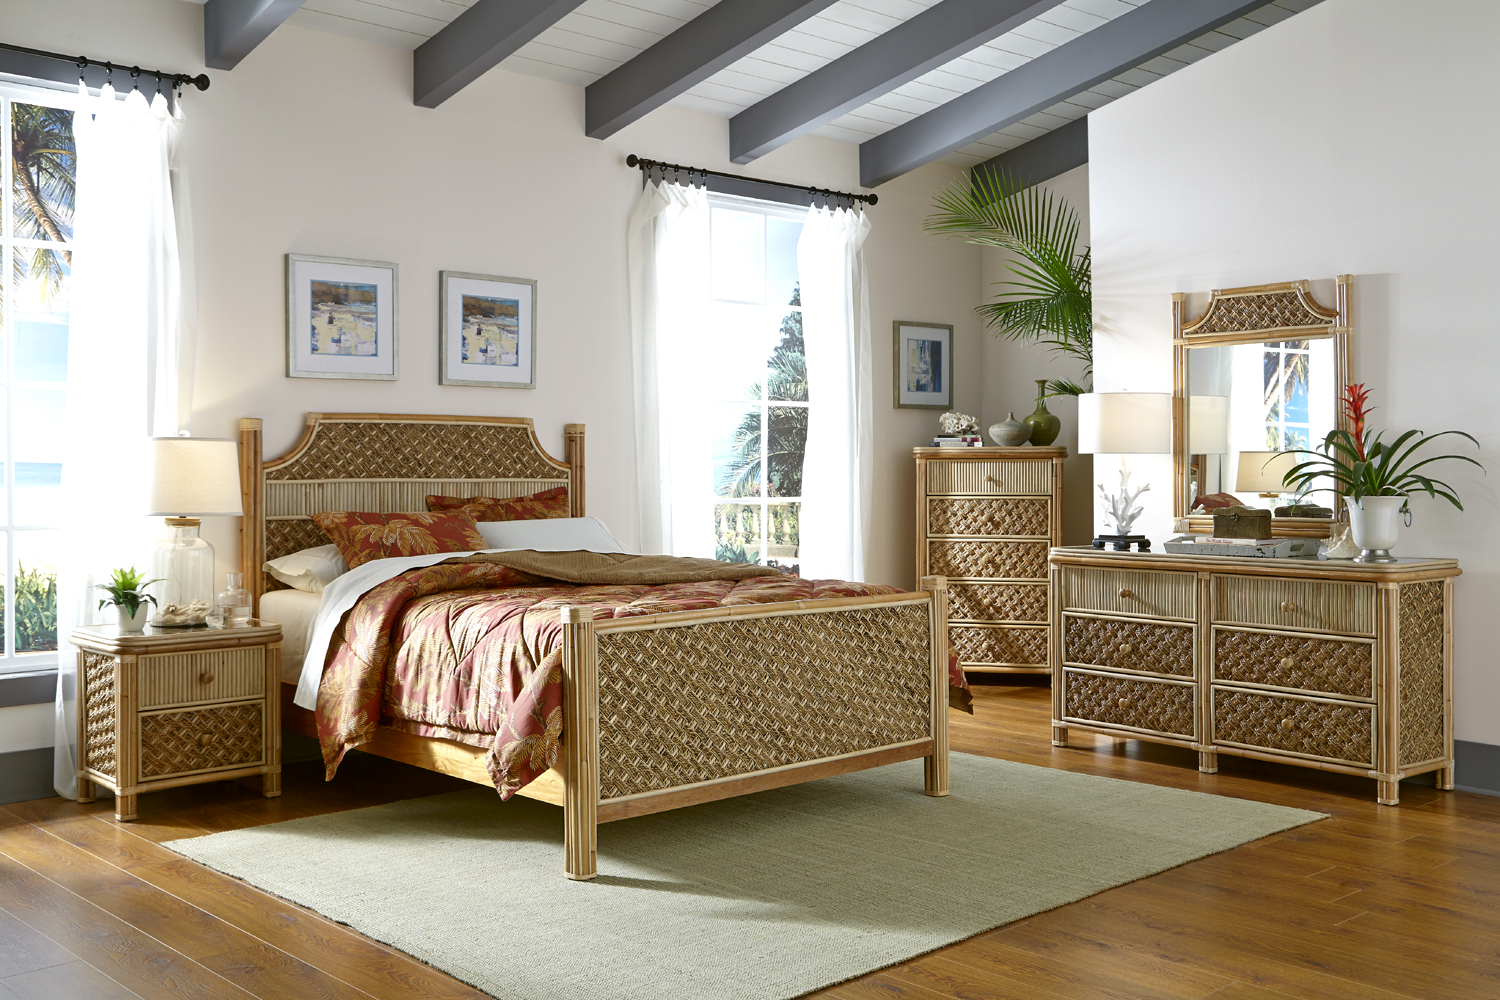 Mandalay Rattan 5 Pc Bedroom King Furniture Set Spice Island Wicker intended for dimensions 1500 X 1000